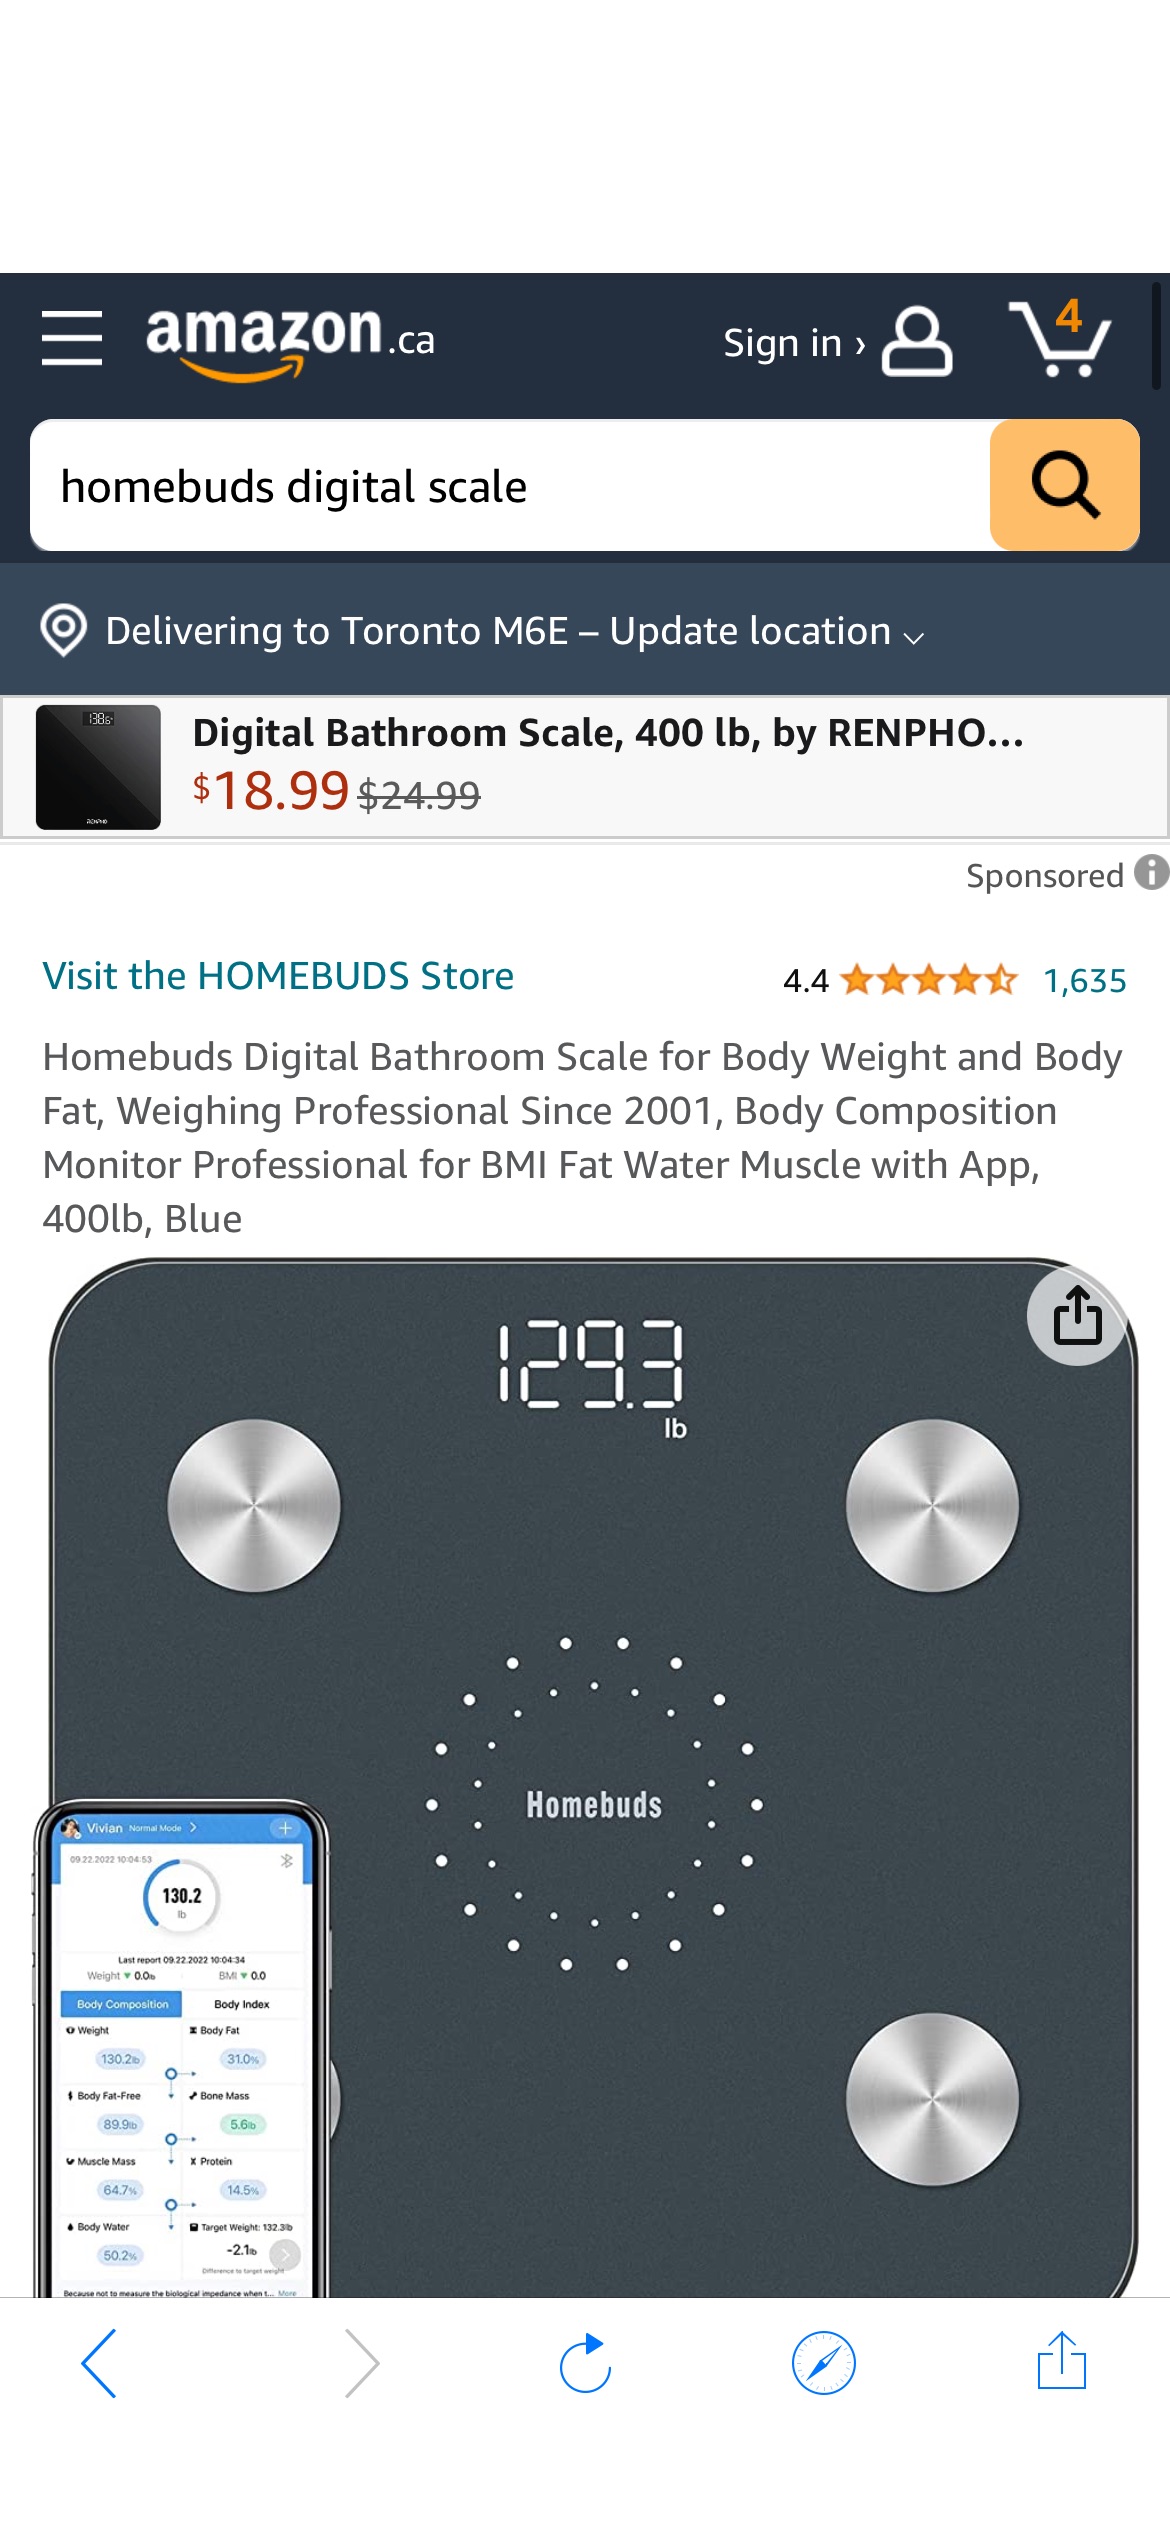 Homebuds Digital Bathroom Scale for Body Weight and Body Fat, Weighing Professional Since 2001, Body Composition Monitor Professional for BMI Fat Water Muscle with App, 400lb, Blue : Amazon.ca: Health